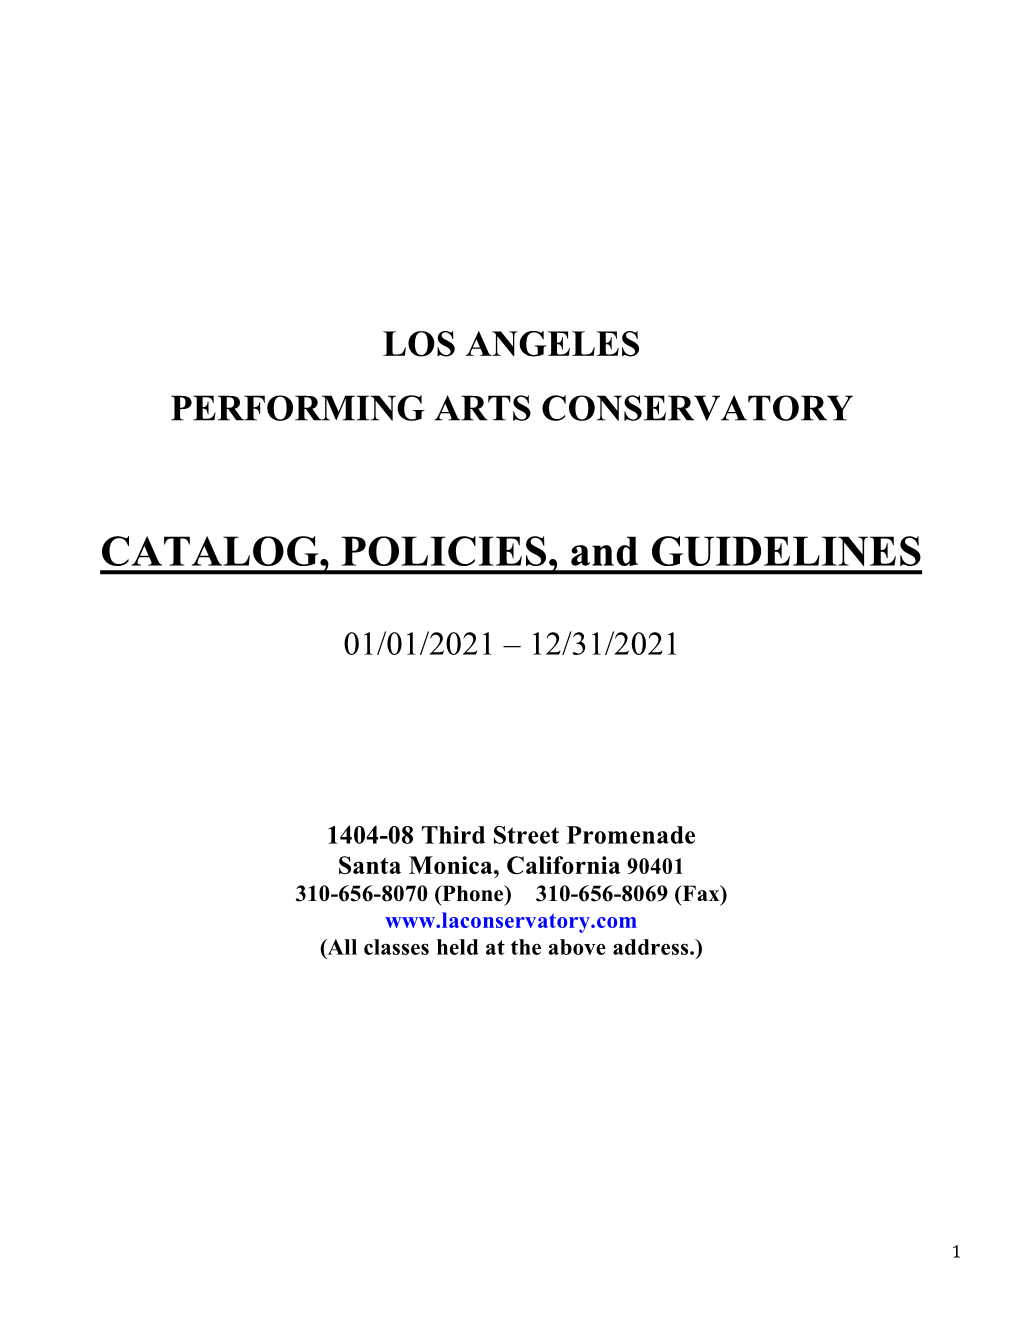 CATALOG, POLICIES, and GUIDELINES